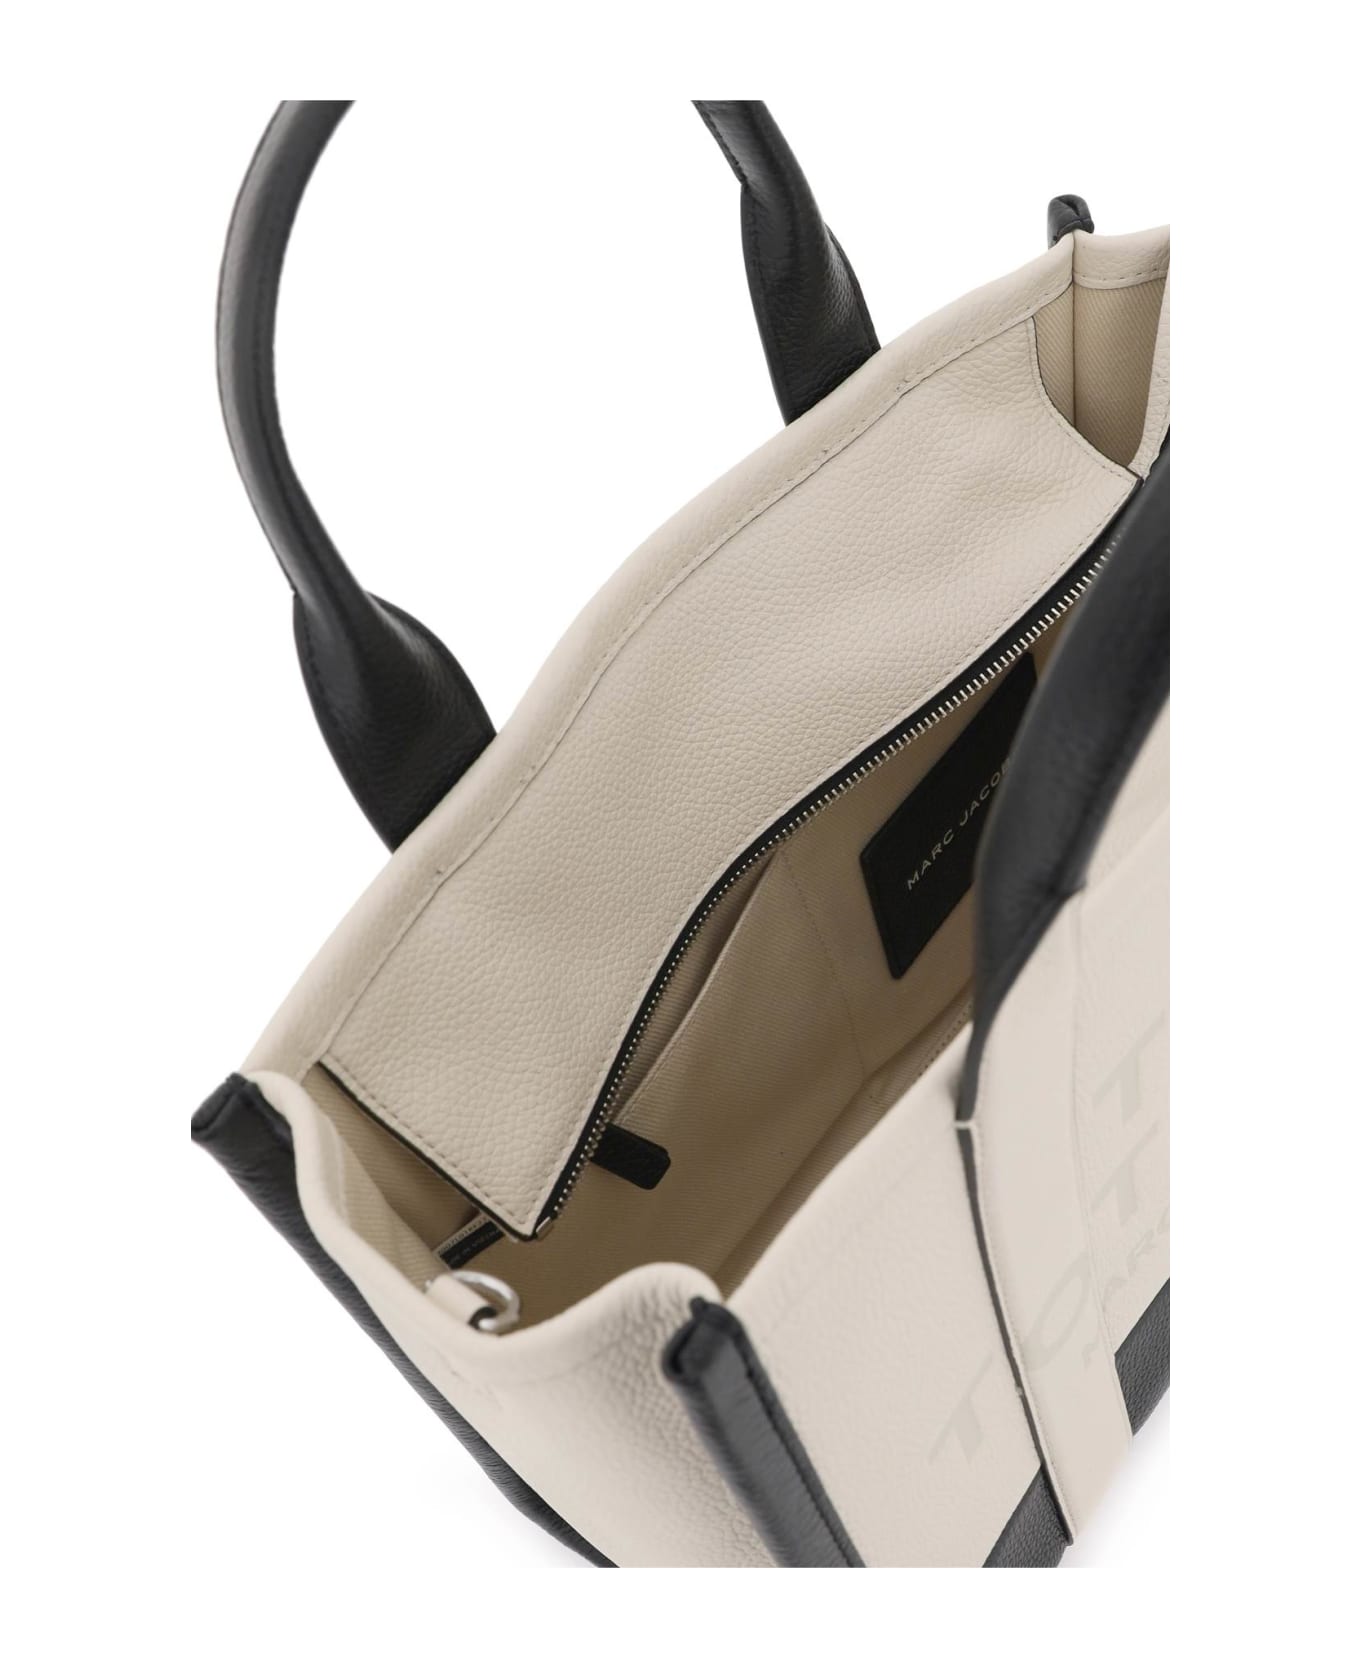 Marc Jacobs The Colorblock Medium Tote Bag - Ivory トートバッグ